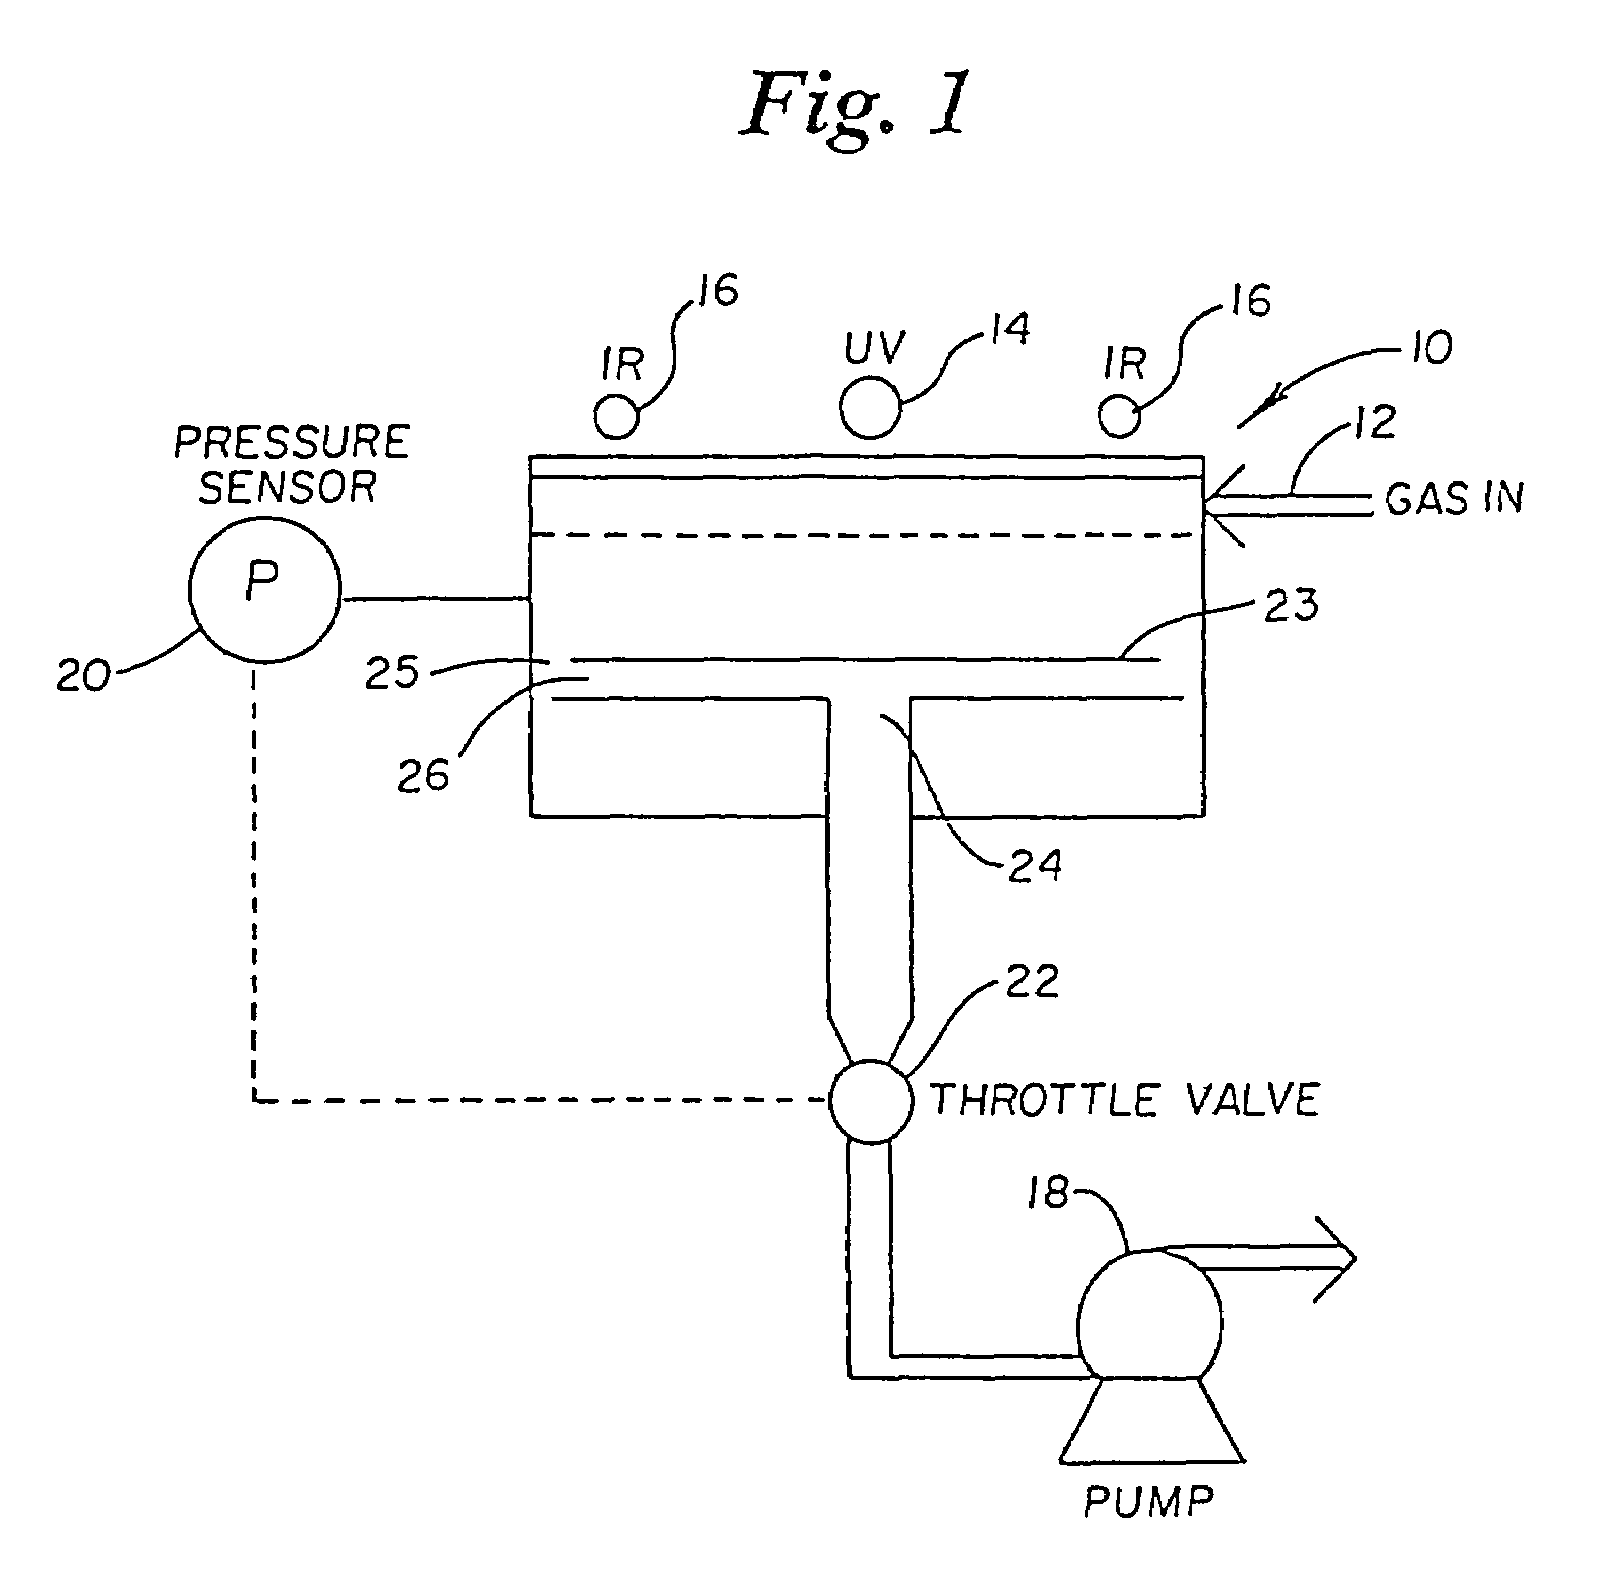 Apparatus for surface conditioning